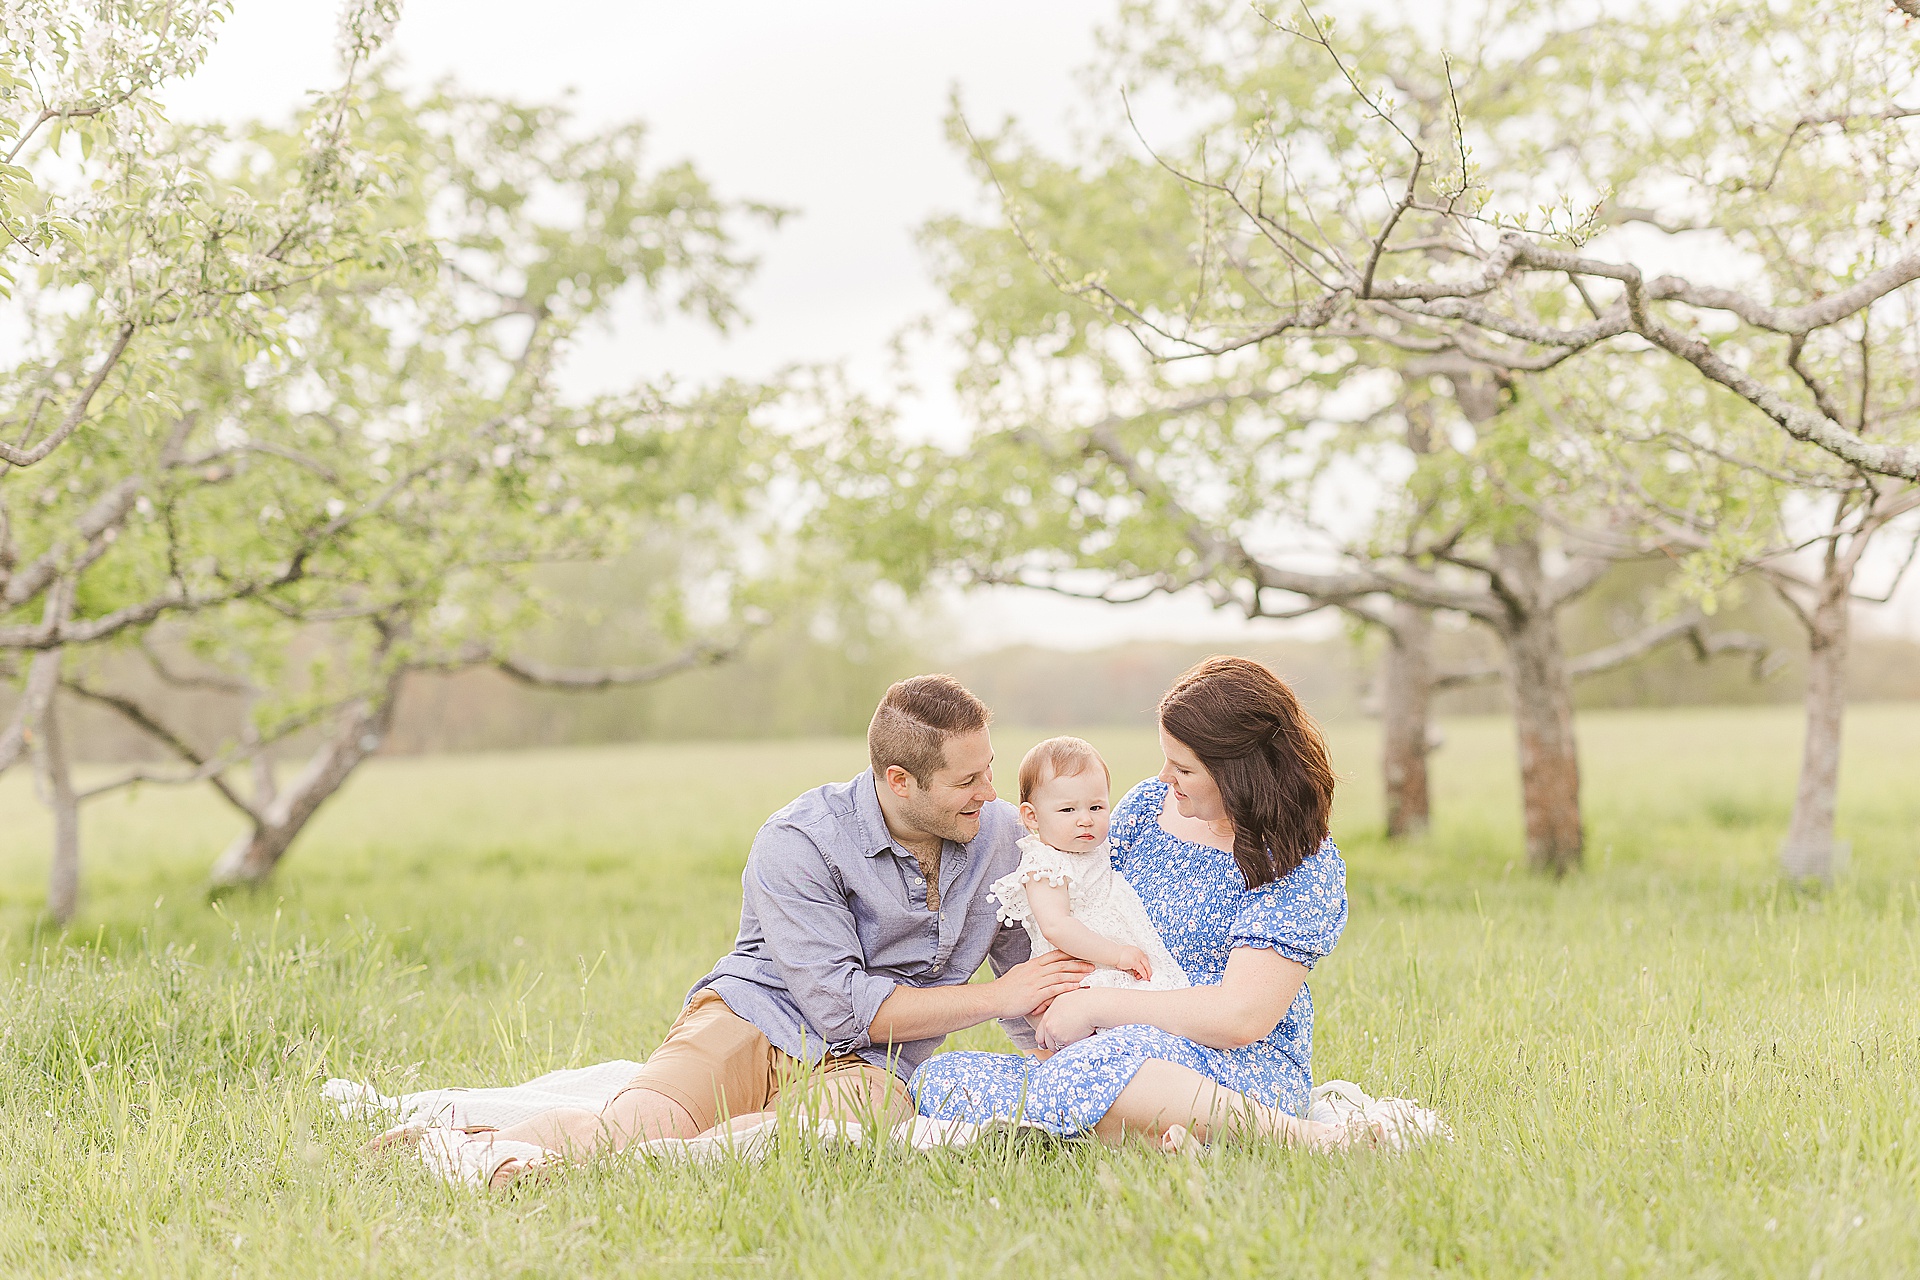 parents sit on blanket with baby during first birthday family photo session with Sara Sniderman Photography at Heard Farm in Wayland Massachusetts